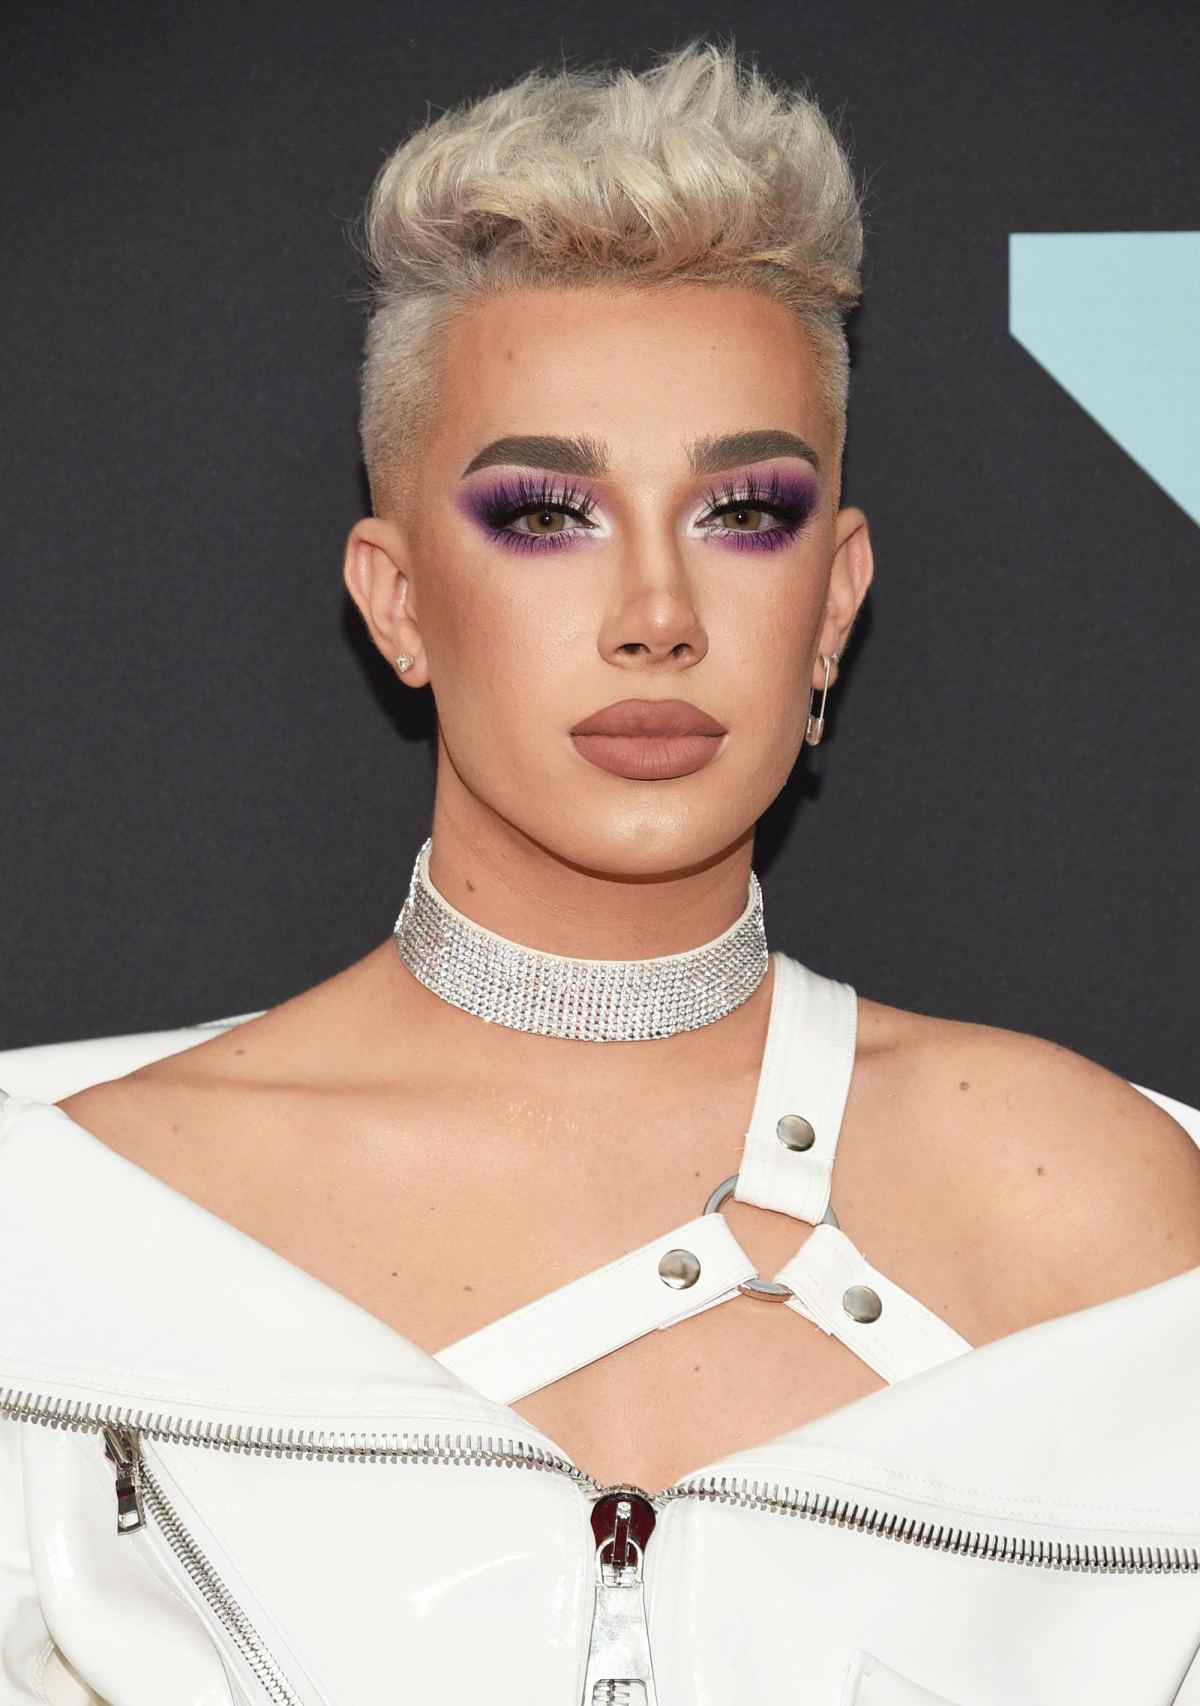 James Charles Says He Was Threatened by Uber Driver Details